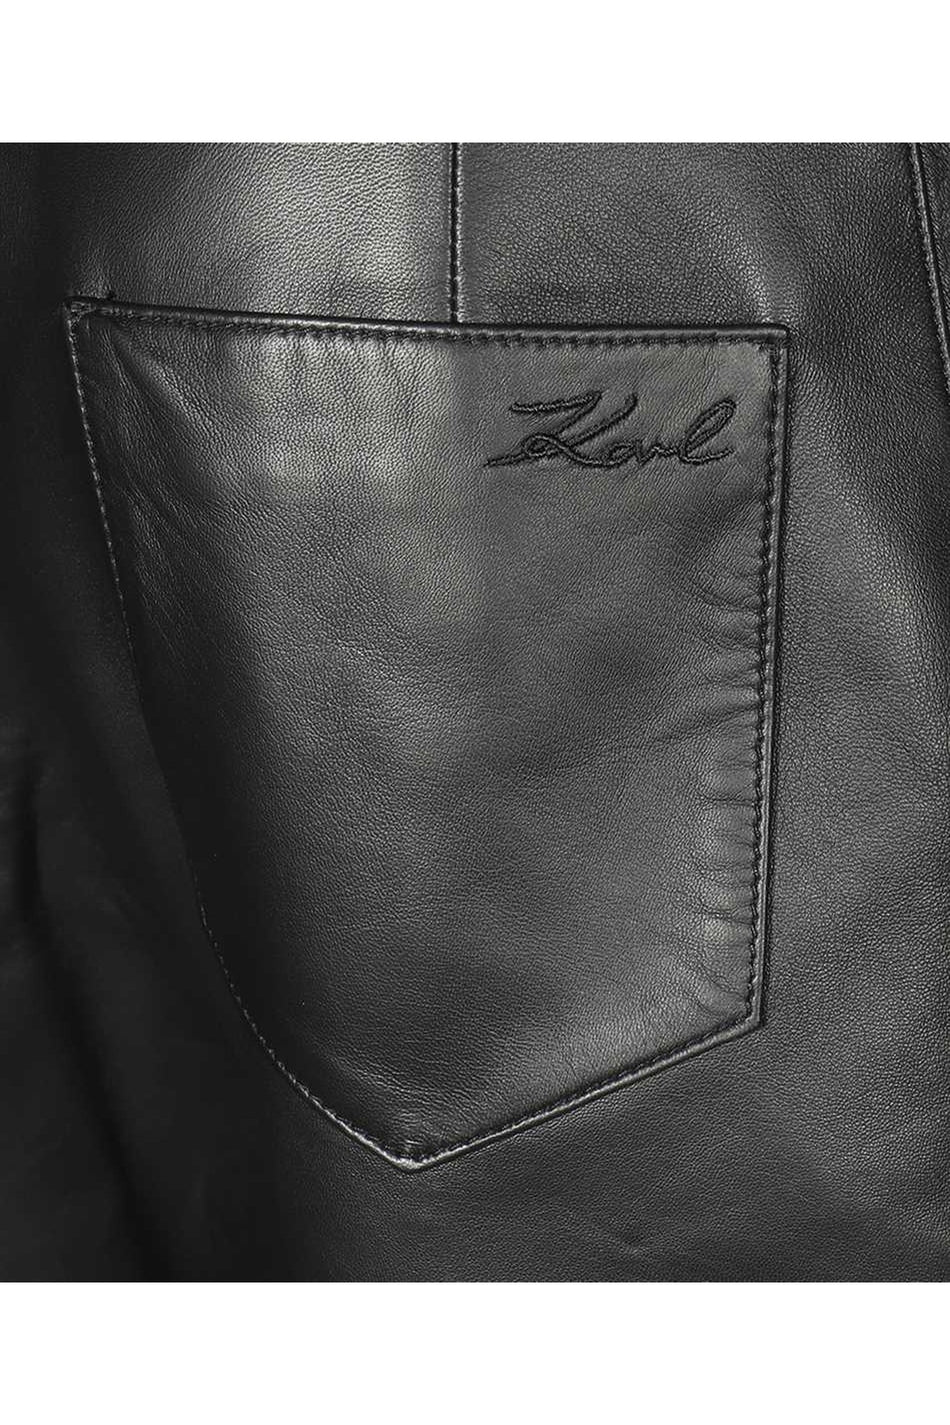 Leather pants-Karl Lagerfeld-OUTLET-SALE-ARCHIVIST